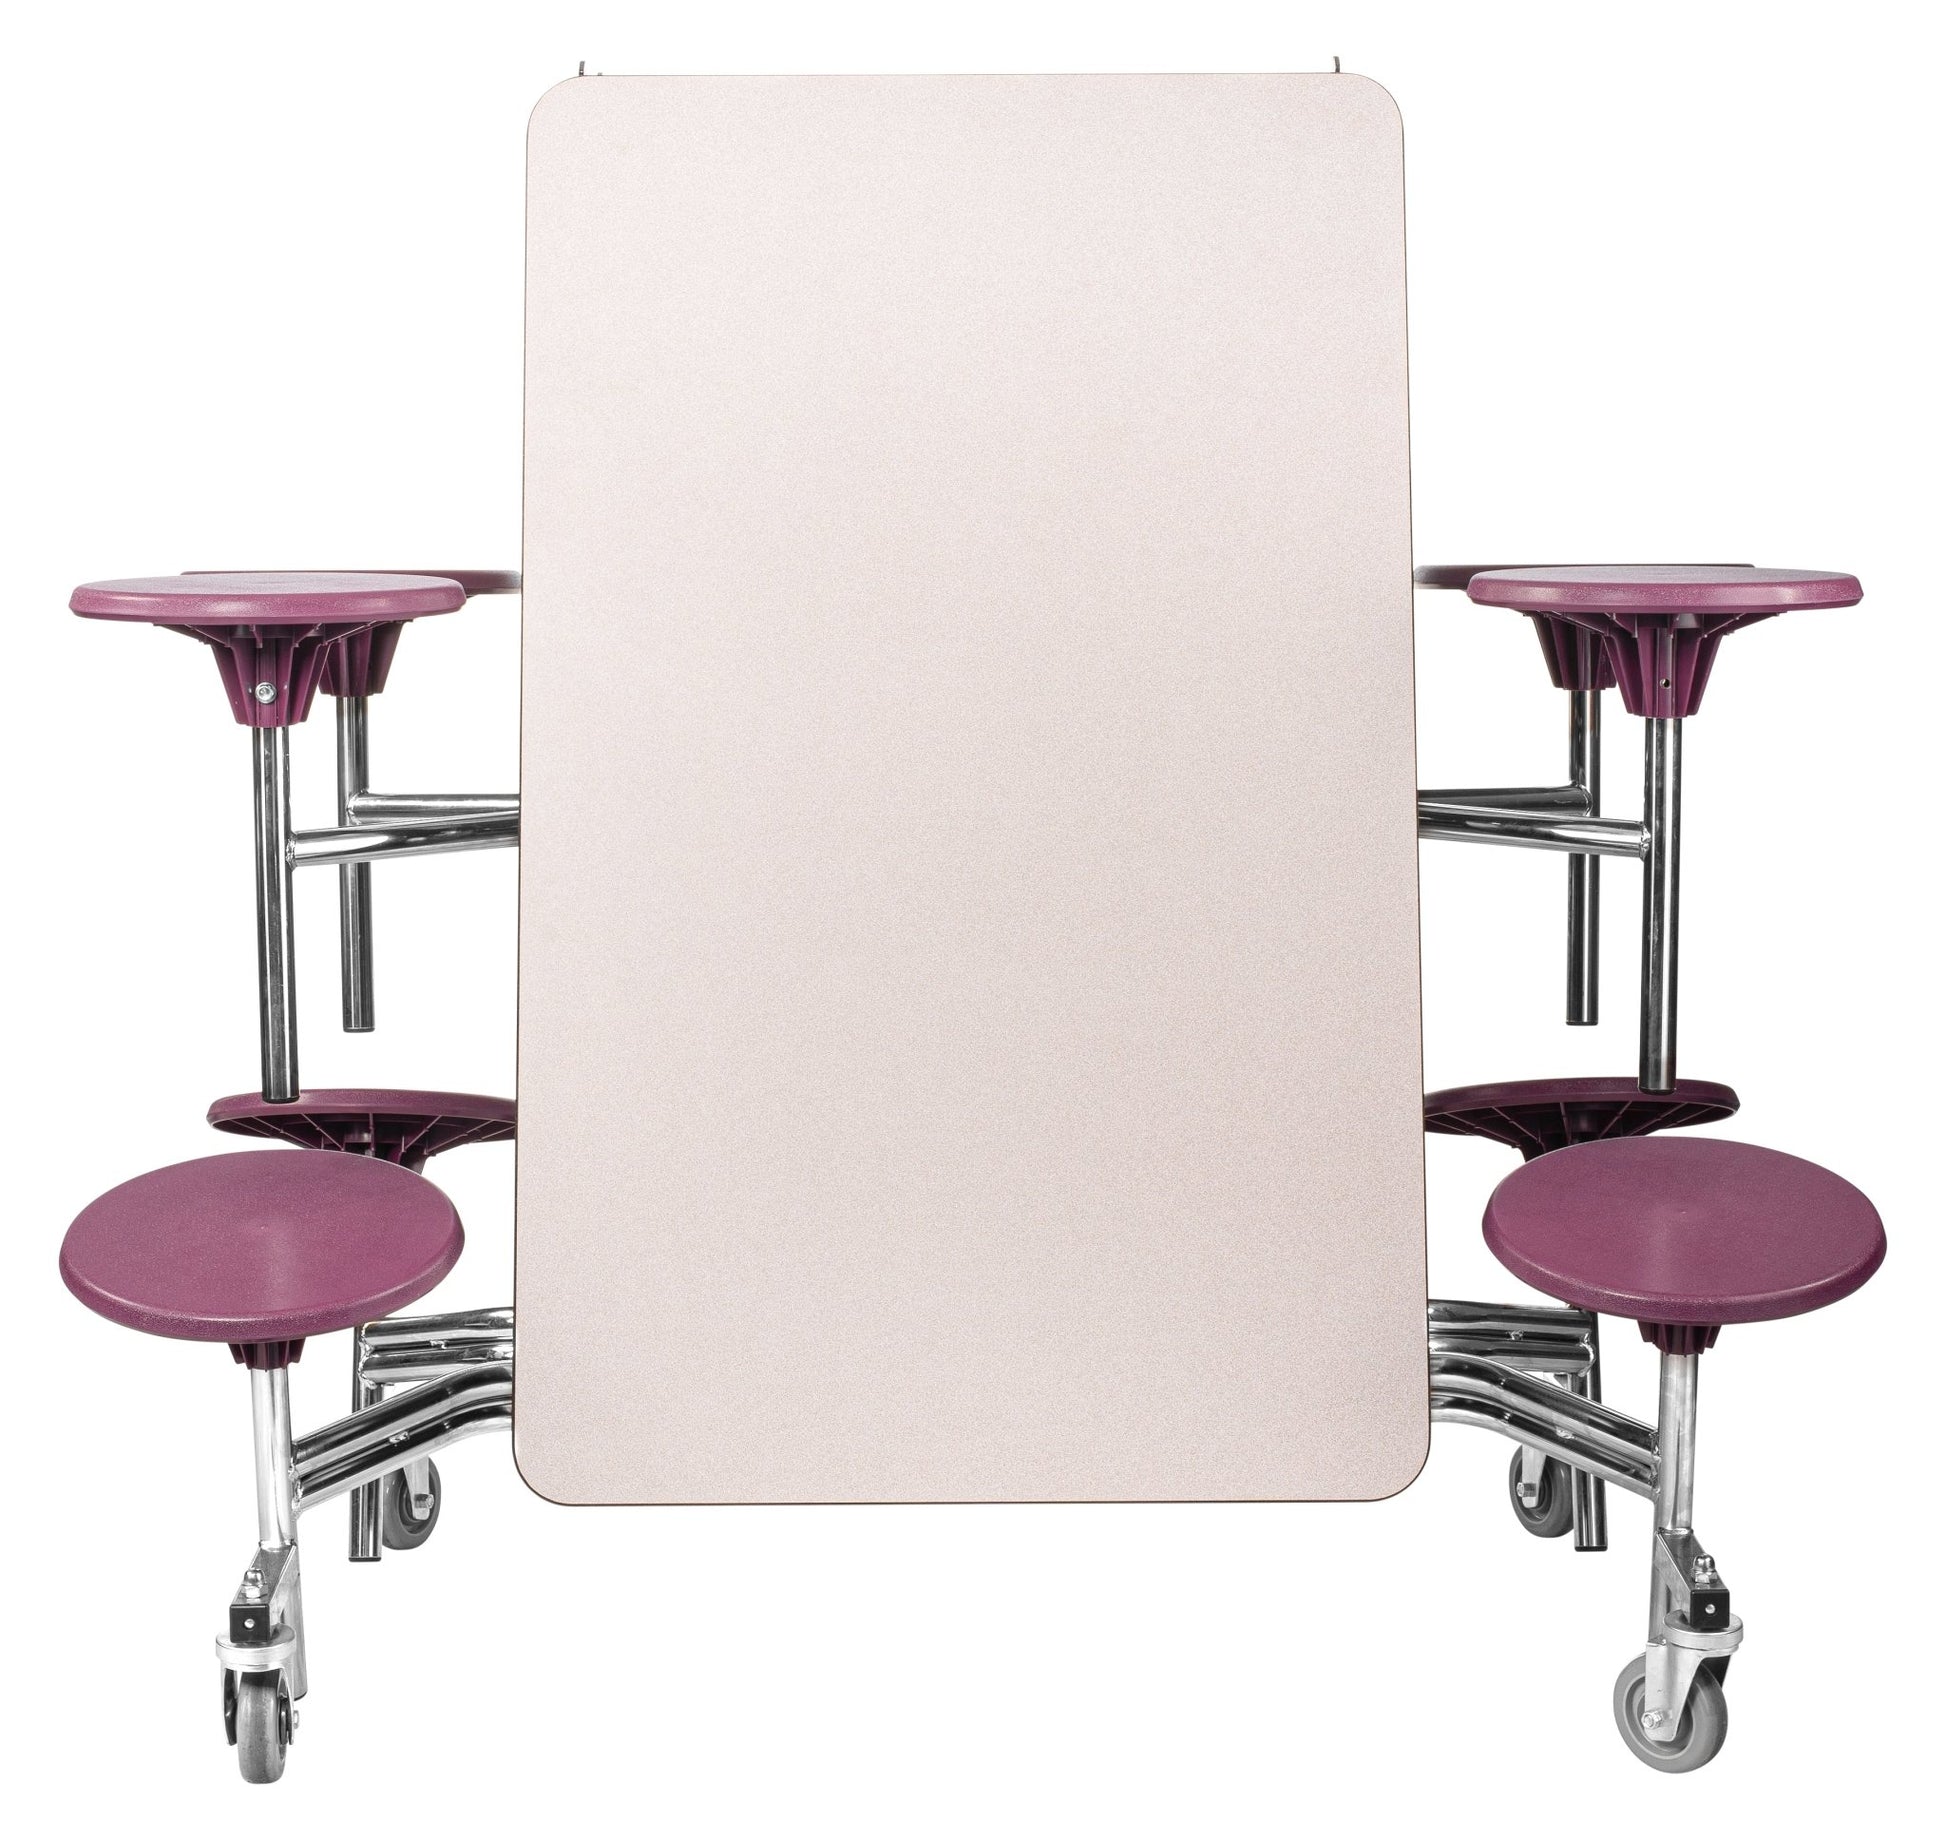 NPS Mobile Cafeteria Table - 30" W x 8' L - 8 Stools - Particleboard Core - T-Molding Edge - Chrome Frame - SchoolOutlet